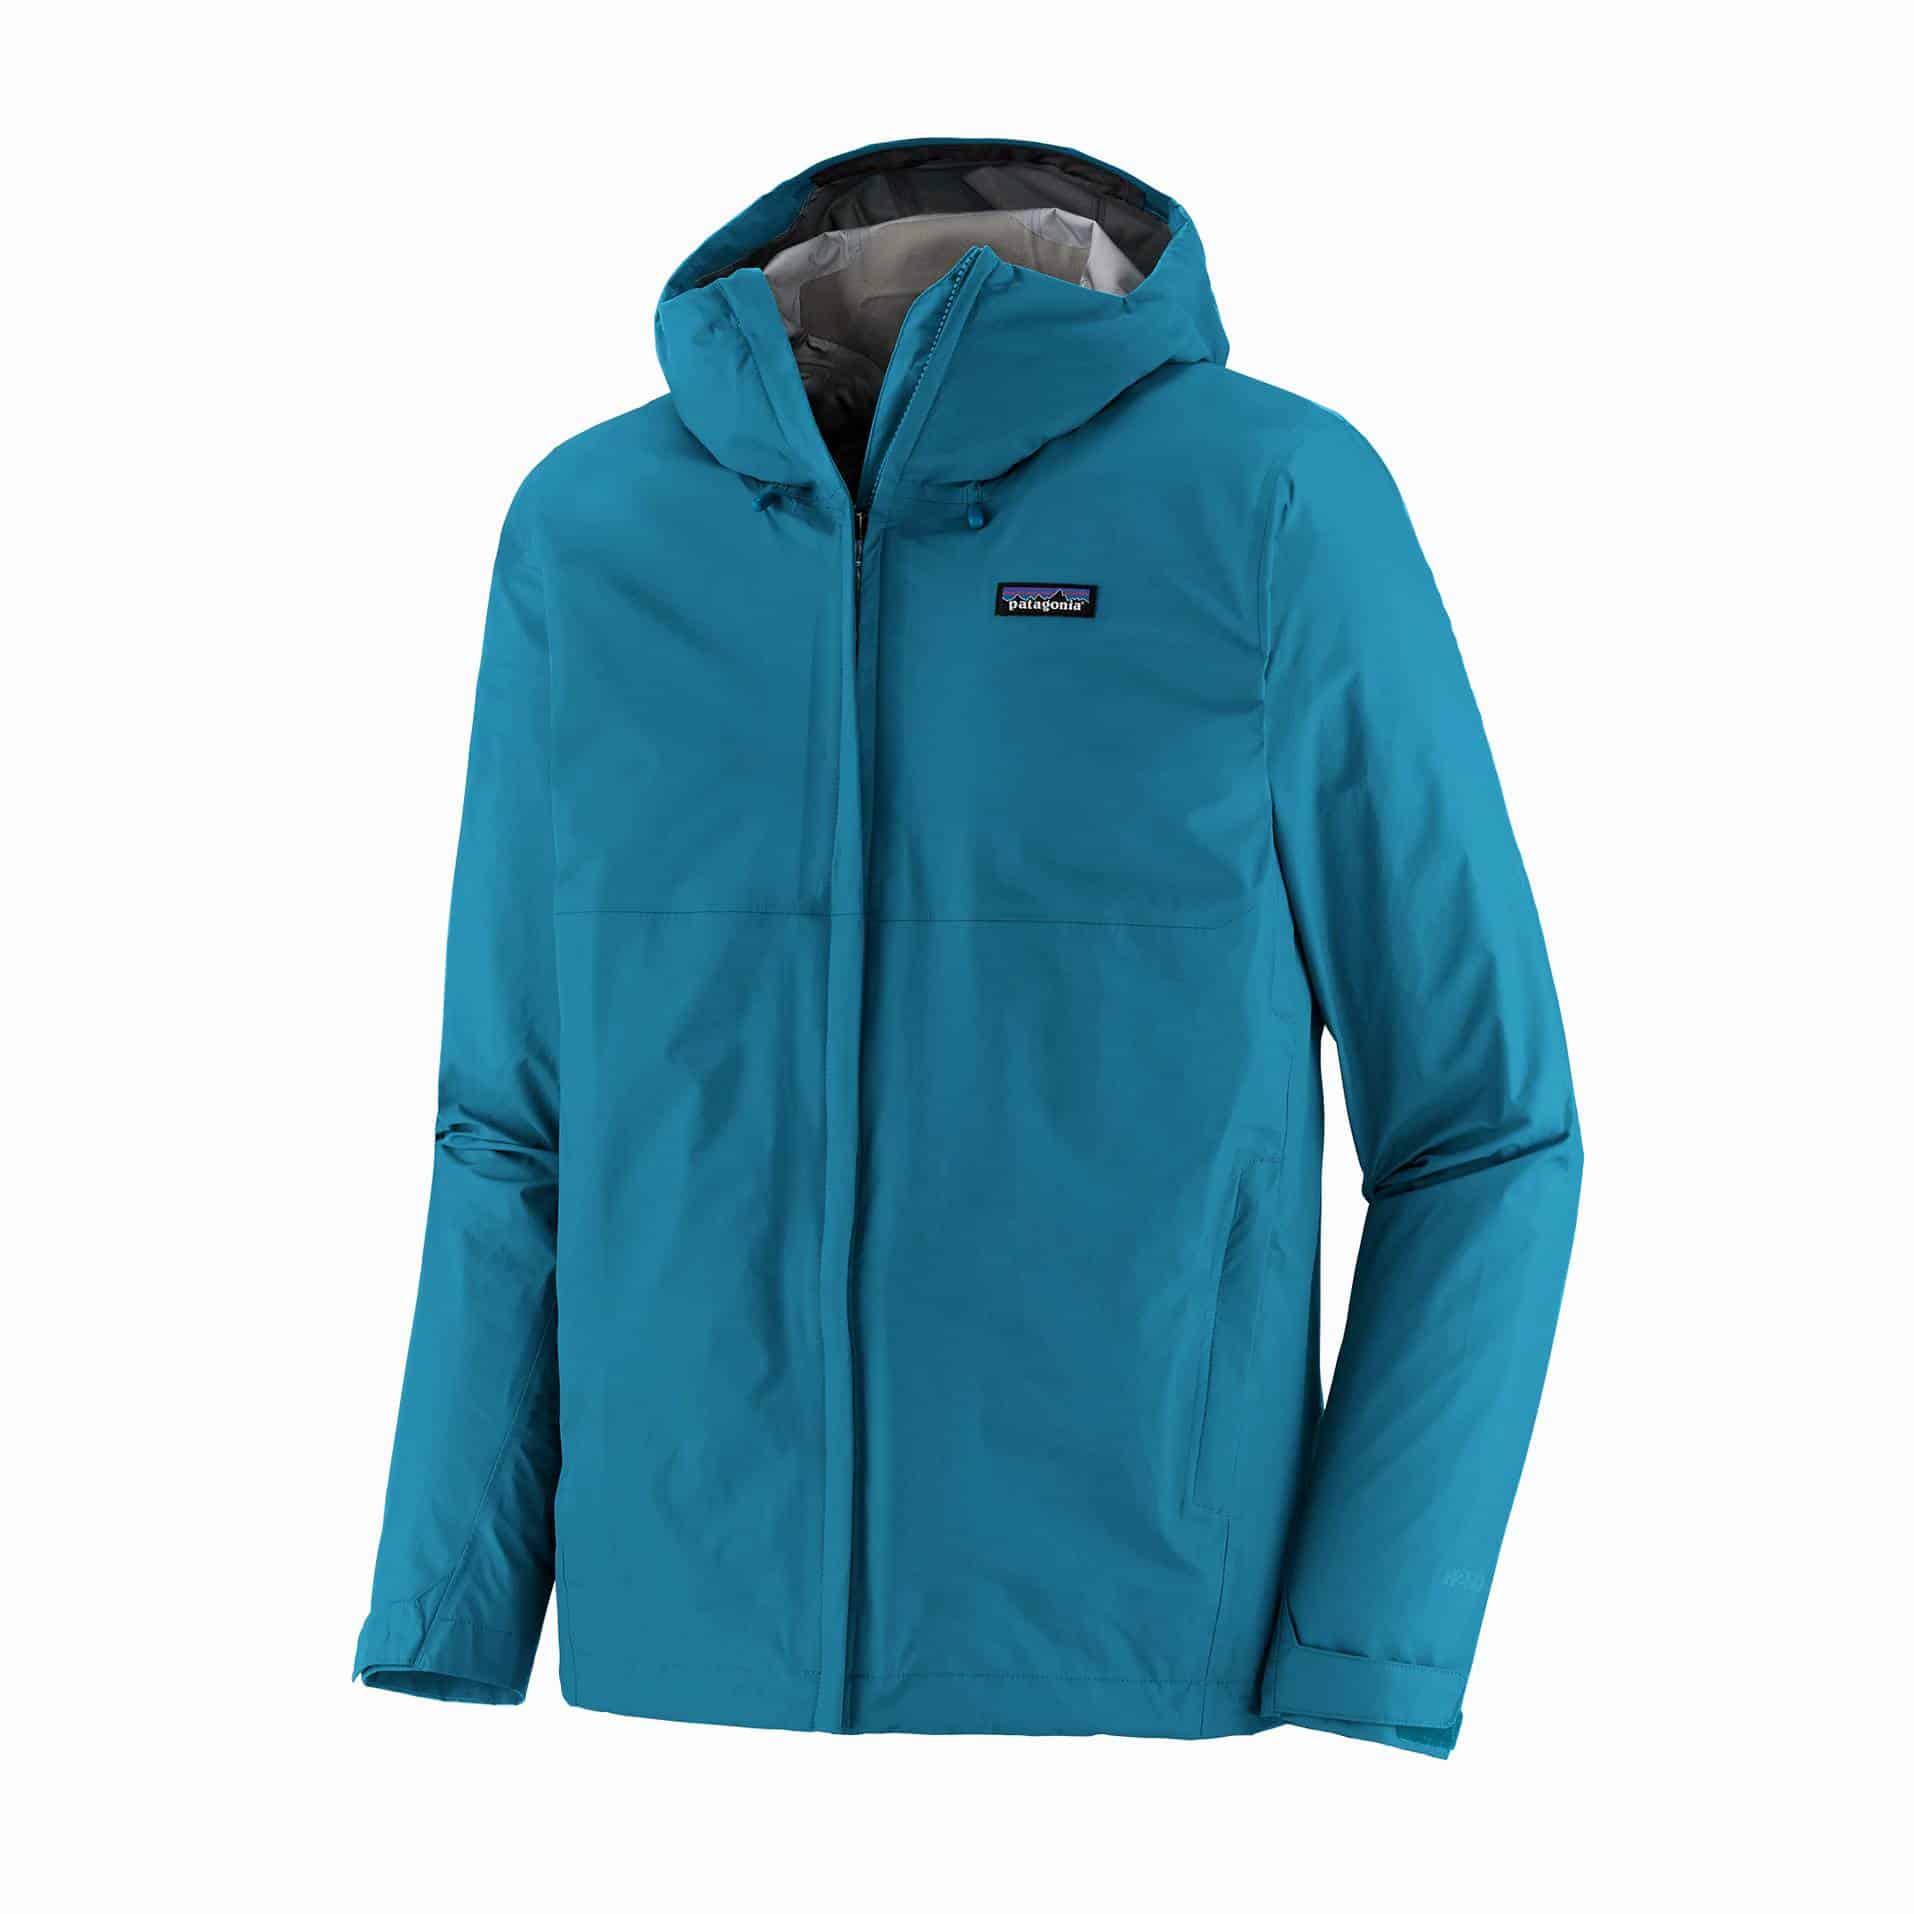 what is the best jacket for hiking - Patagonia Torrentshell 3L Jacket